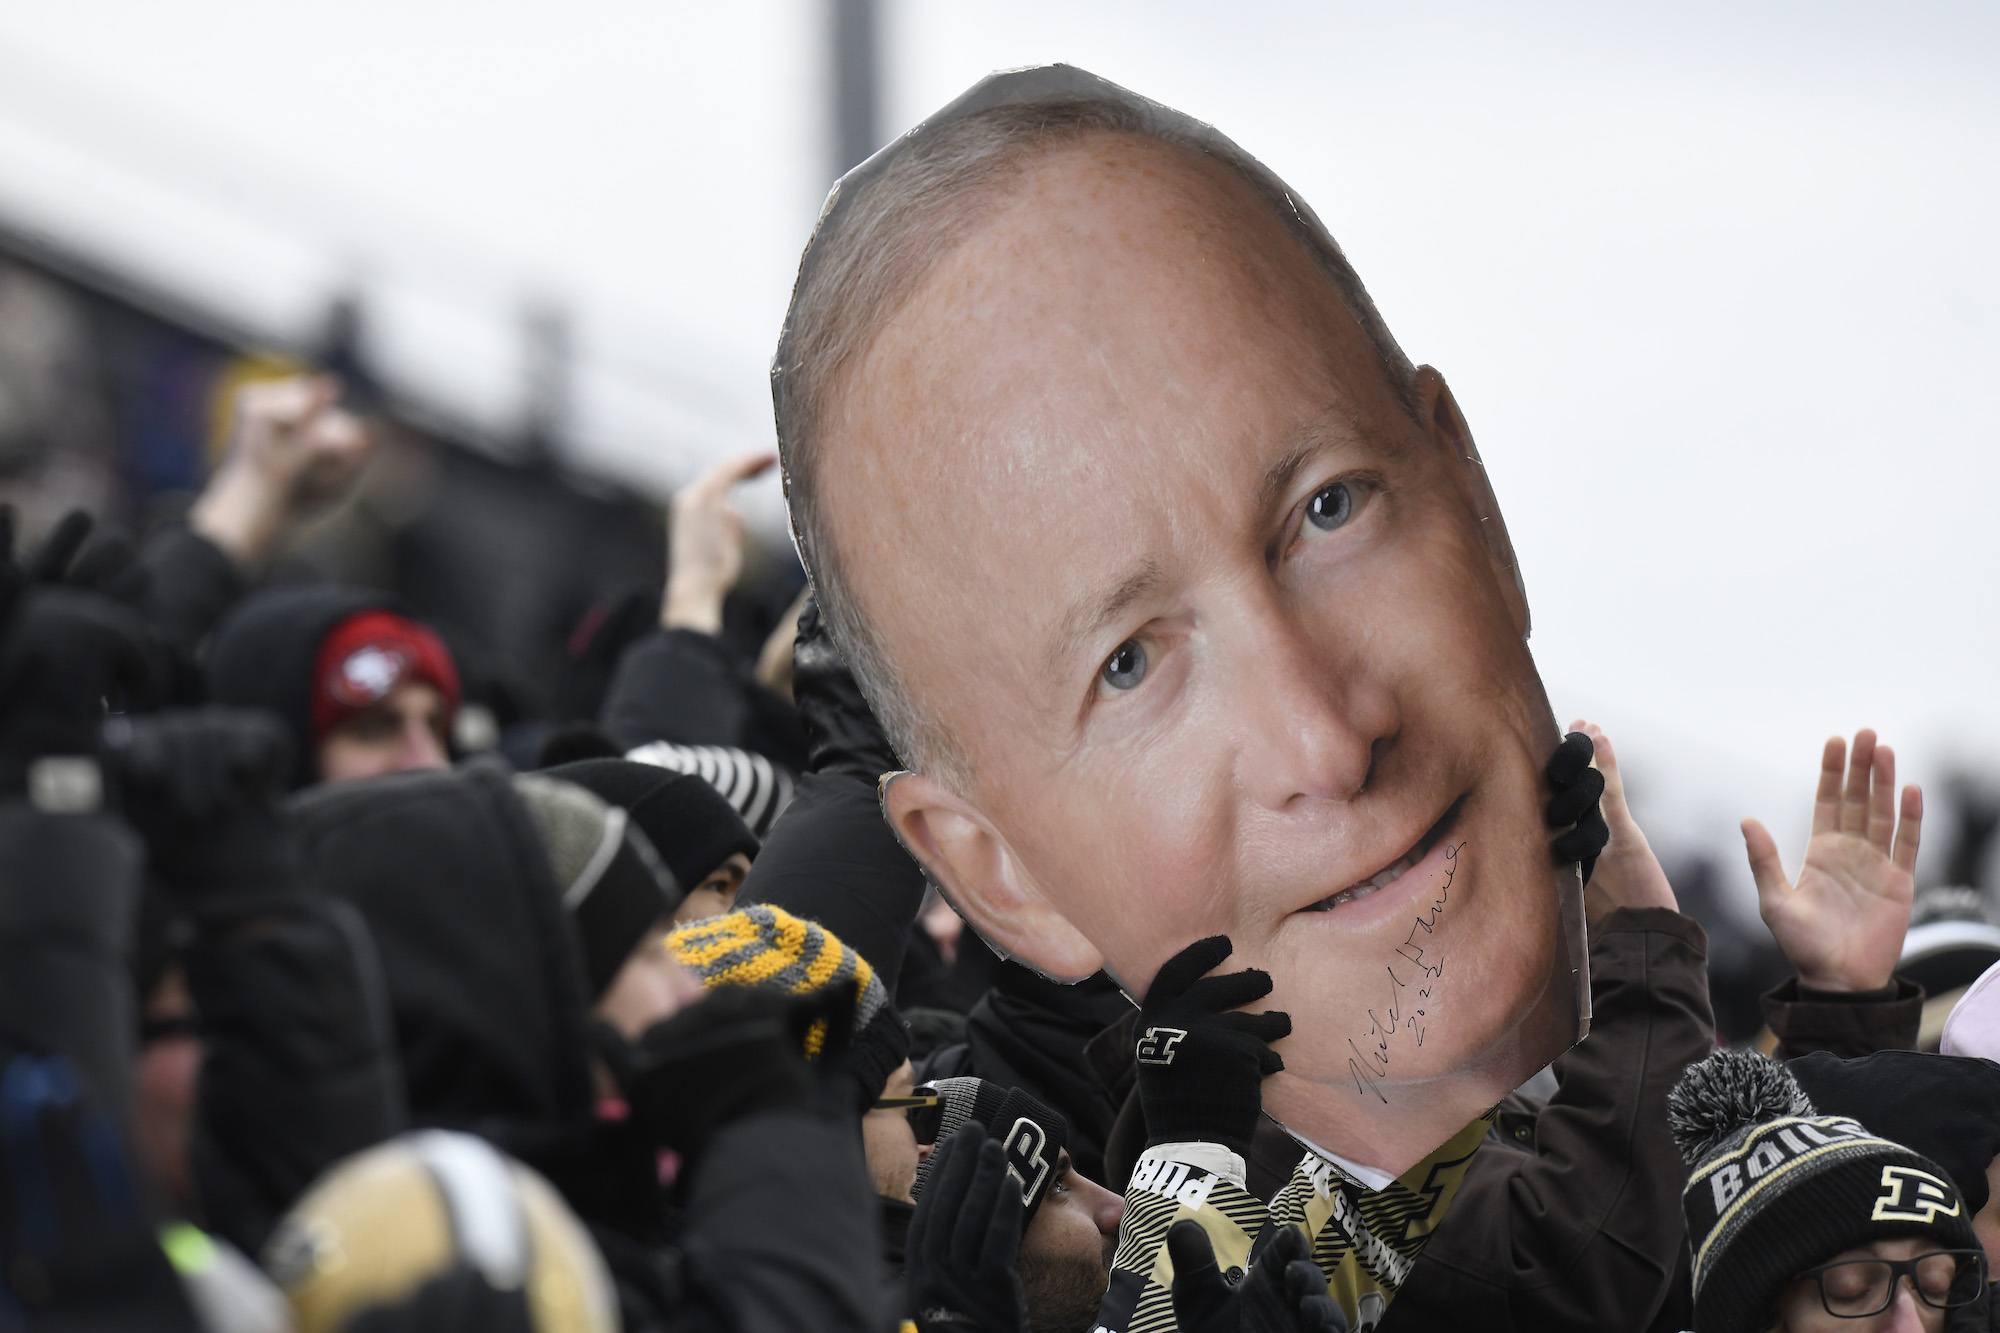 WEST LAFAYETTE, IN - NOVEMBER 19: Purdue students hold up a giant cutout of university president Mitch Daniels during the college football game between the Northwestern Wildcats and the Purdue Boilermakers on November 19, 2022, at Ross-Ade Stadium in West Lafayette, Indiana. (Photo by Michael Allio/Icon Sportswire via Getty Images)